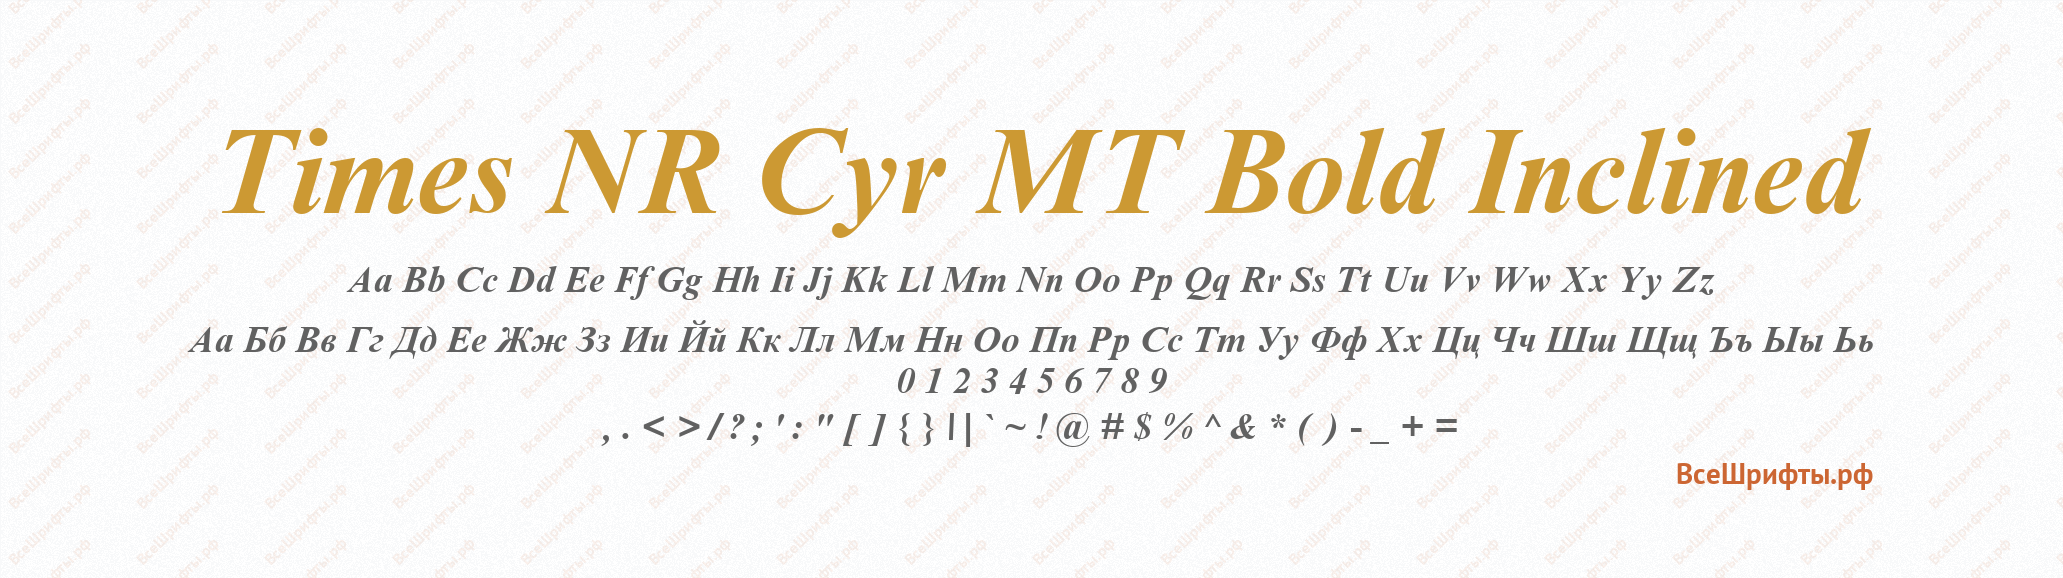 Шрифт Times NR Cyr MT Bold Inclined